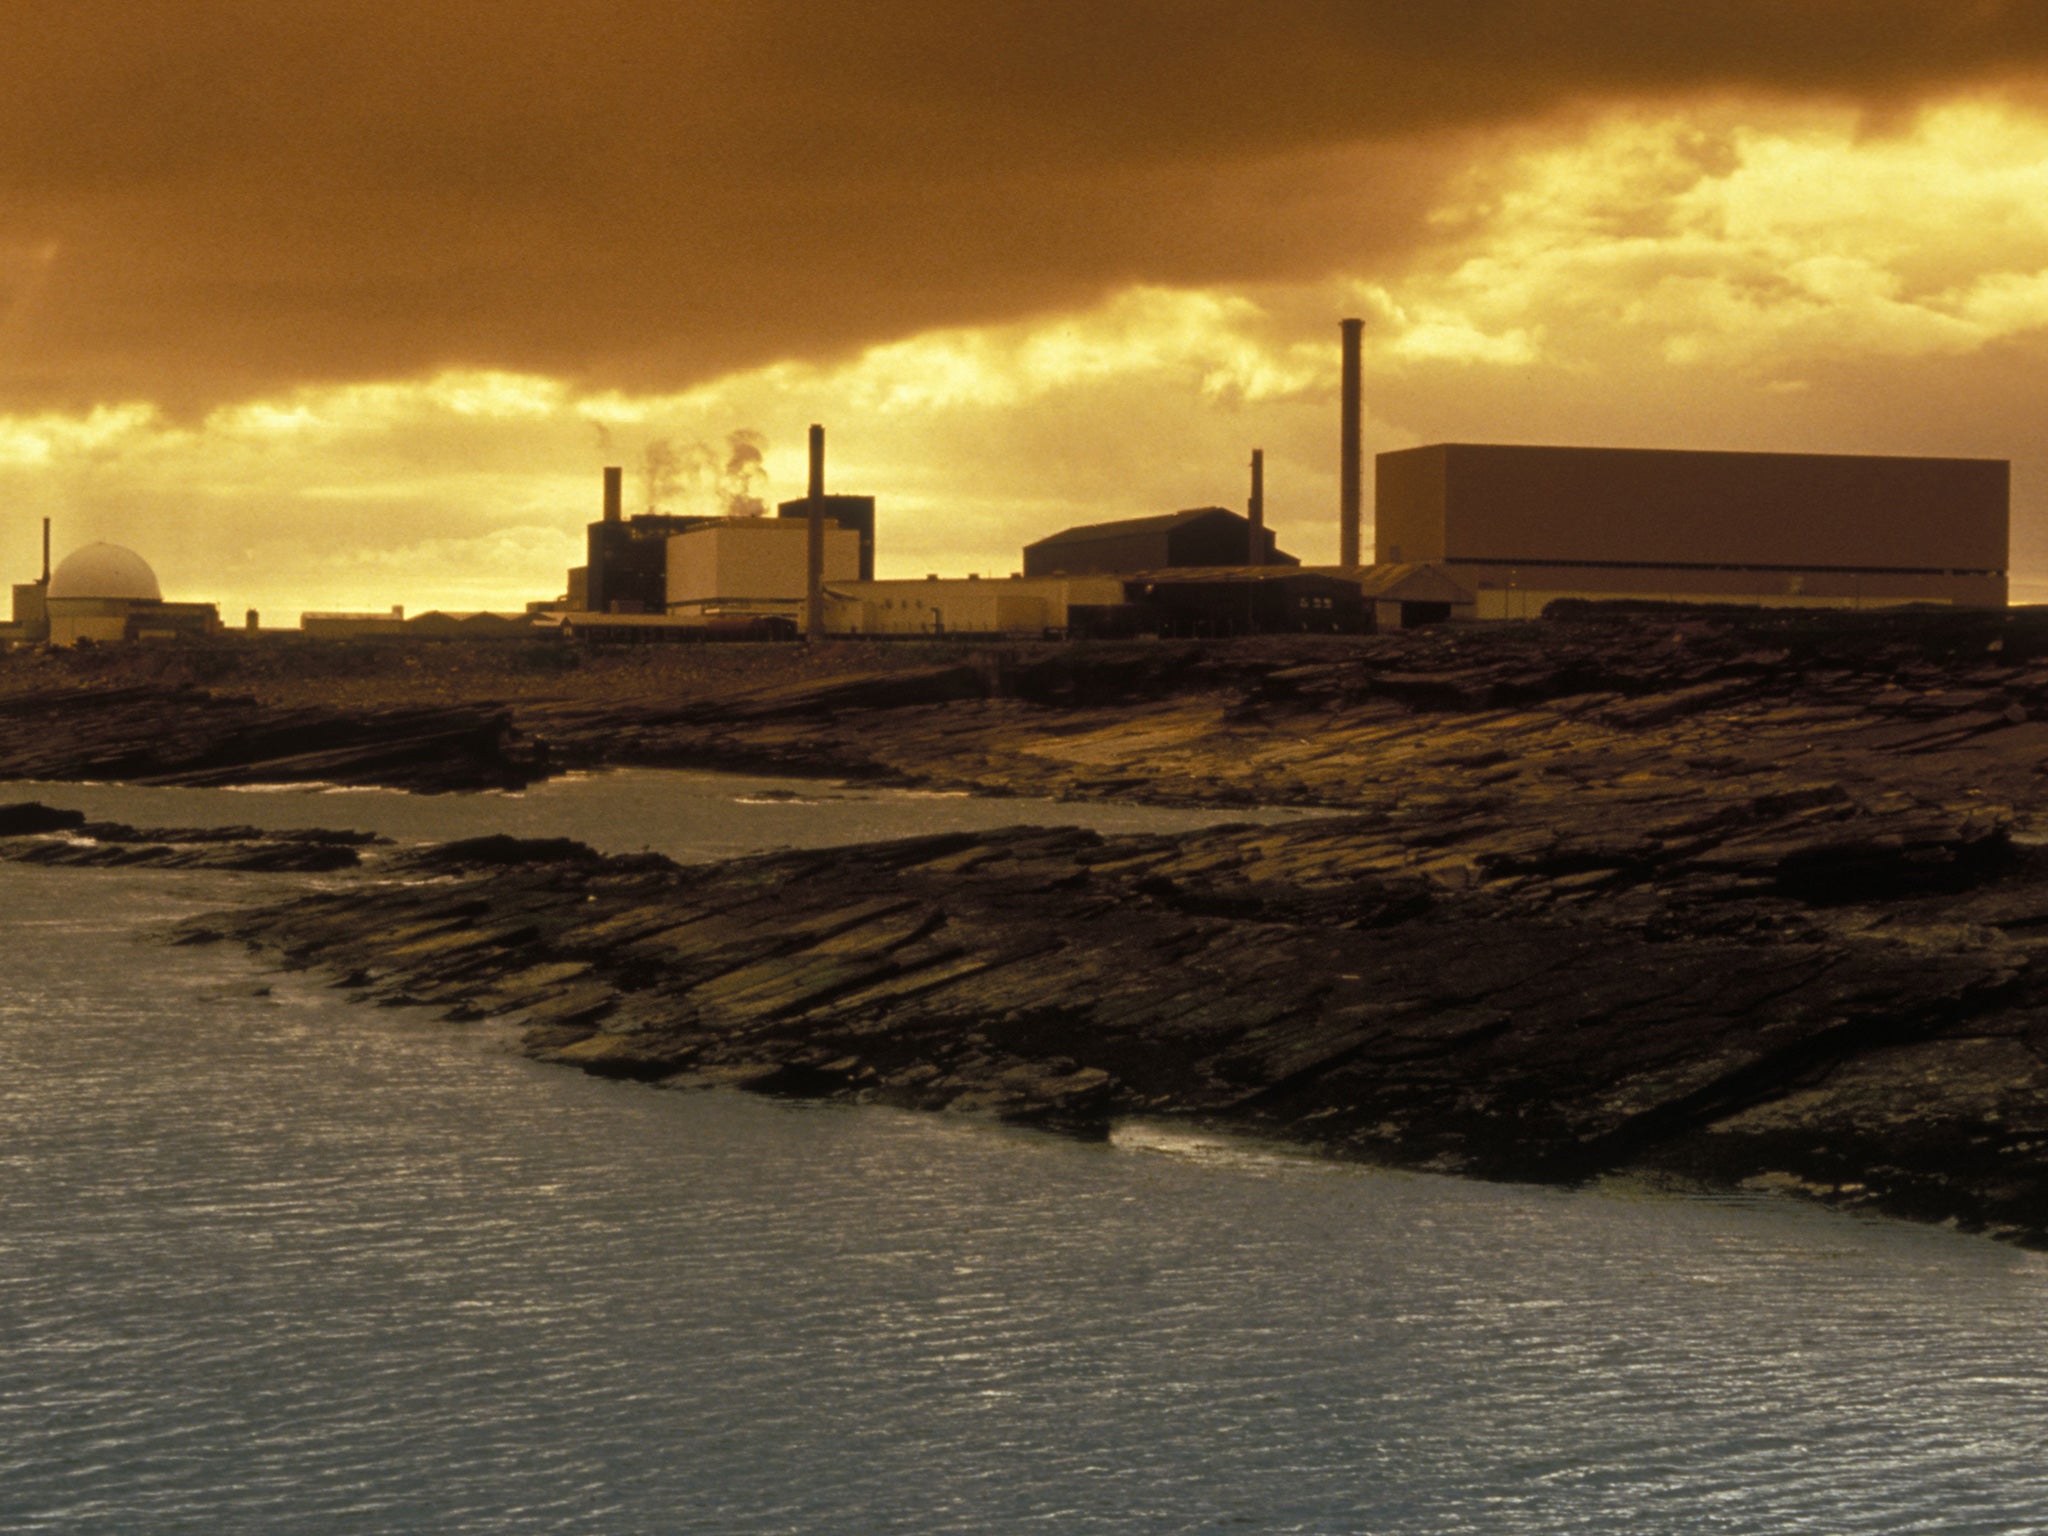 Dounreay, on Scotland’s northern coast, is run by a private sector consortium led by Cavendish Nuclear